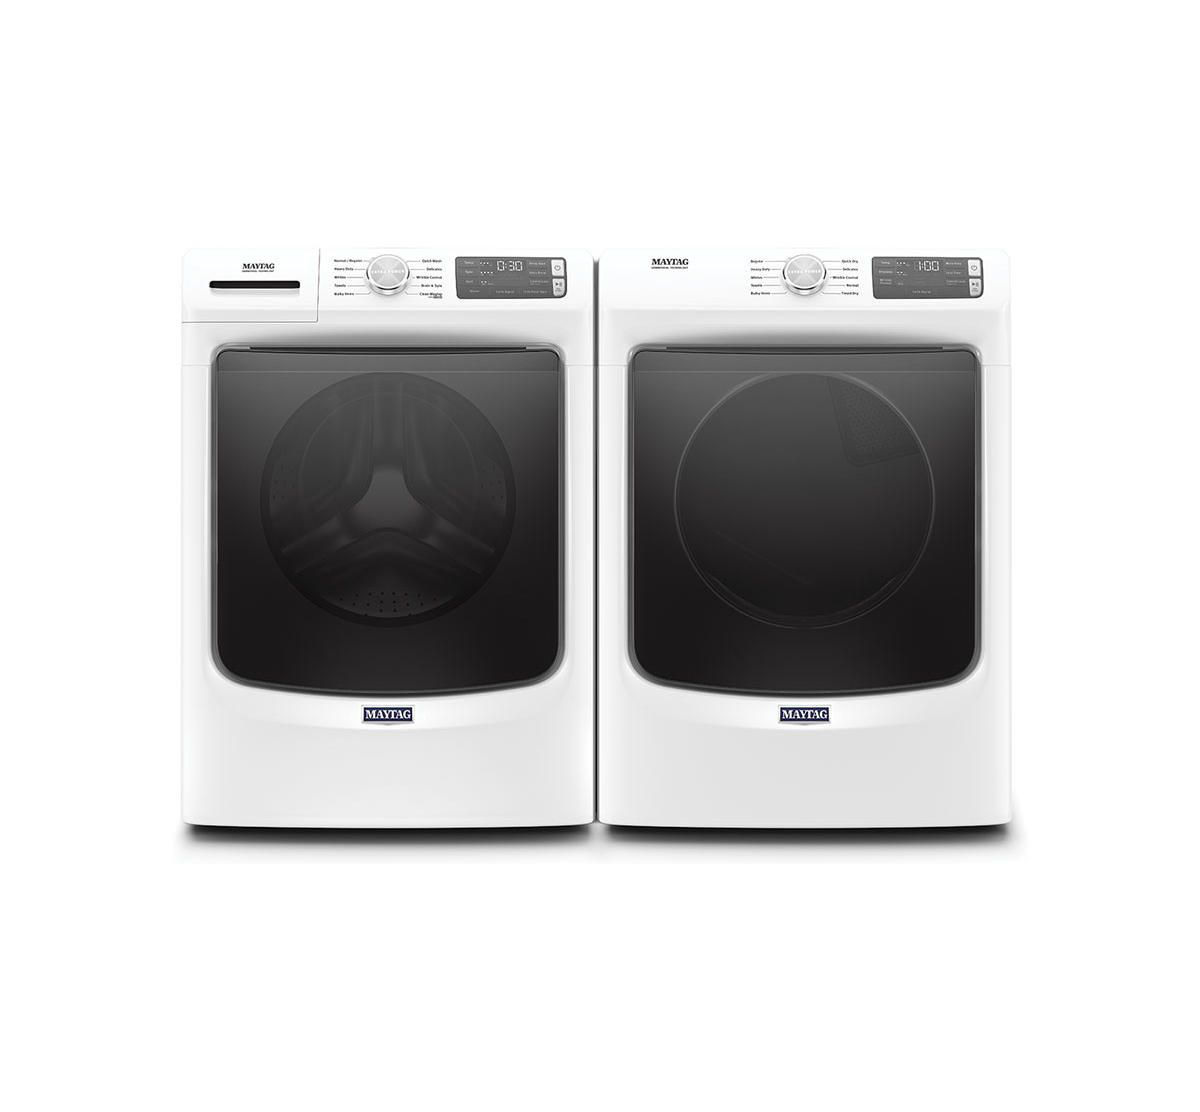 How To Fix The Error Code Sd (or 5d) For Maytag Washing Machine